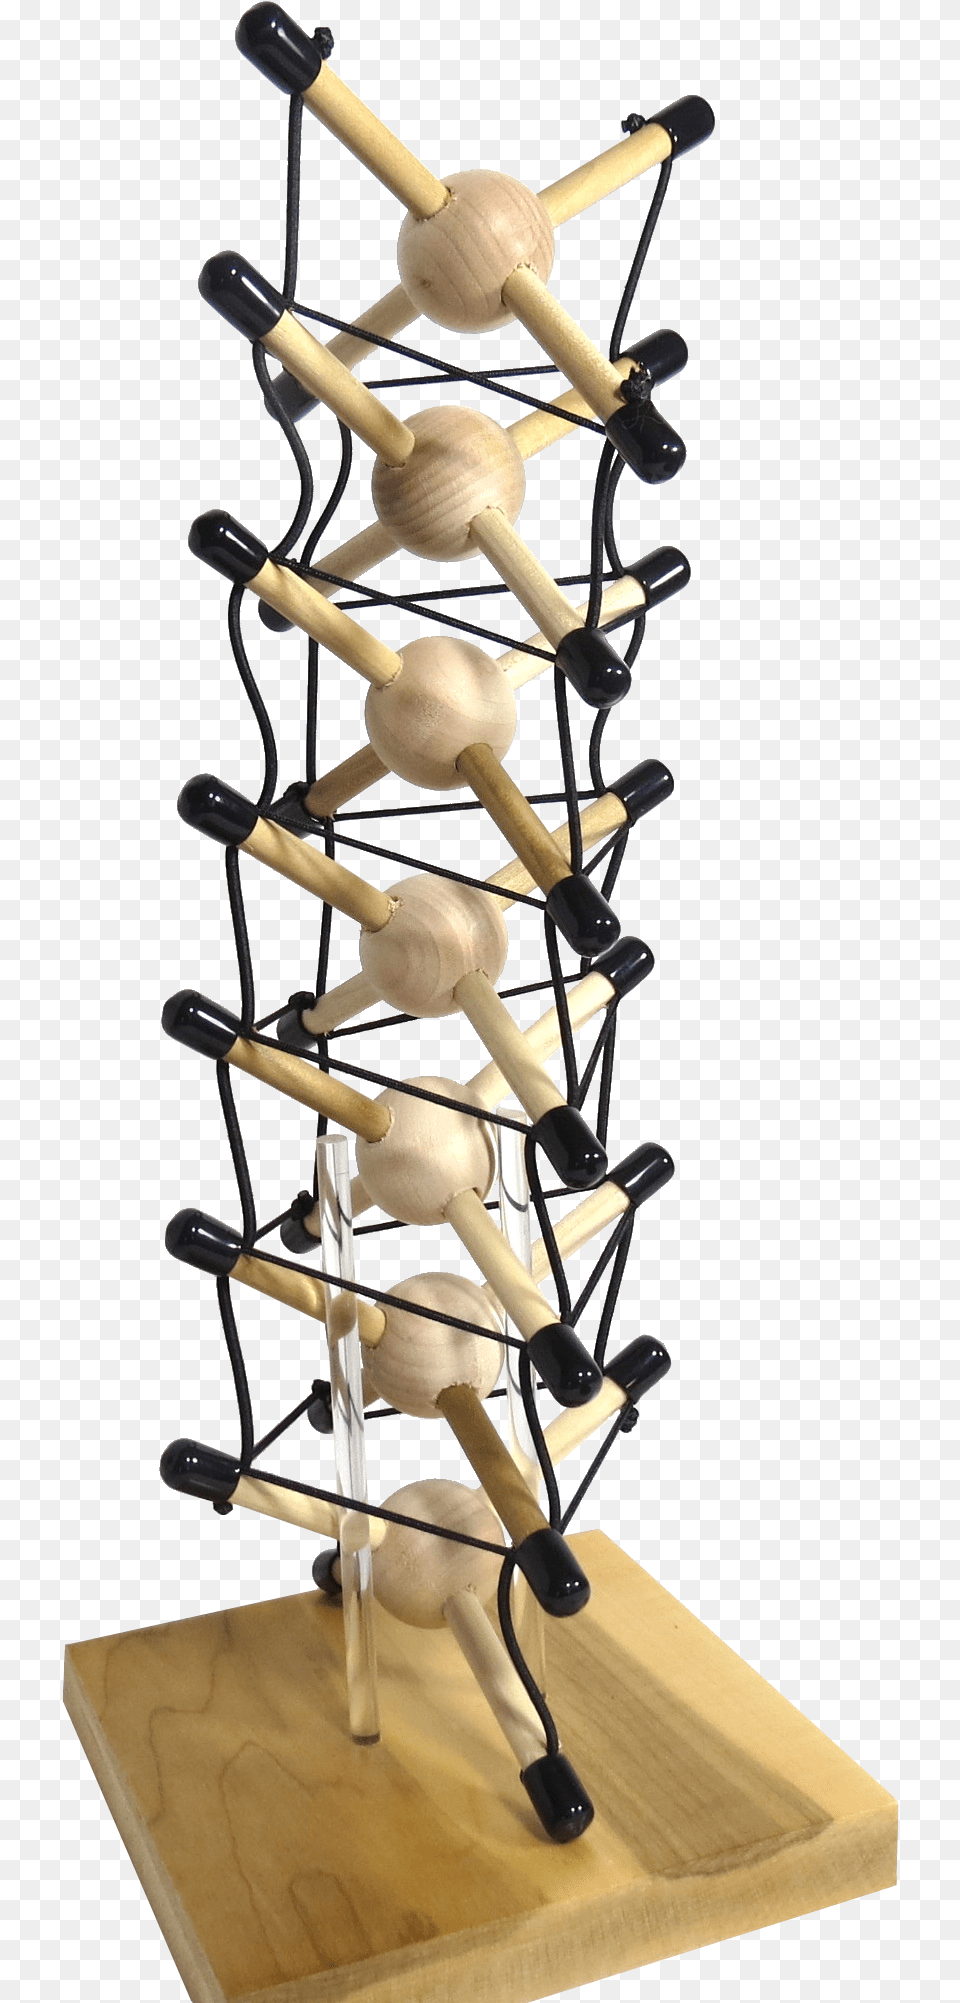 Tensegrity Spine Tensegrity Spine, Furniture, Plywood, Wood, Cutlery Free Png